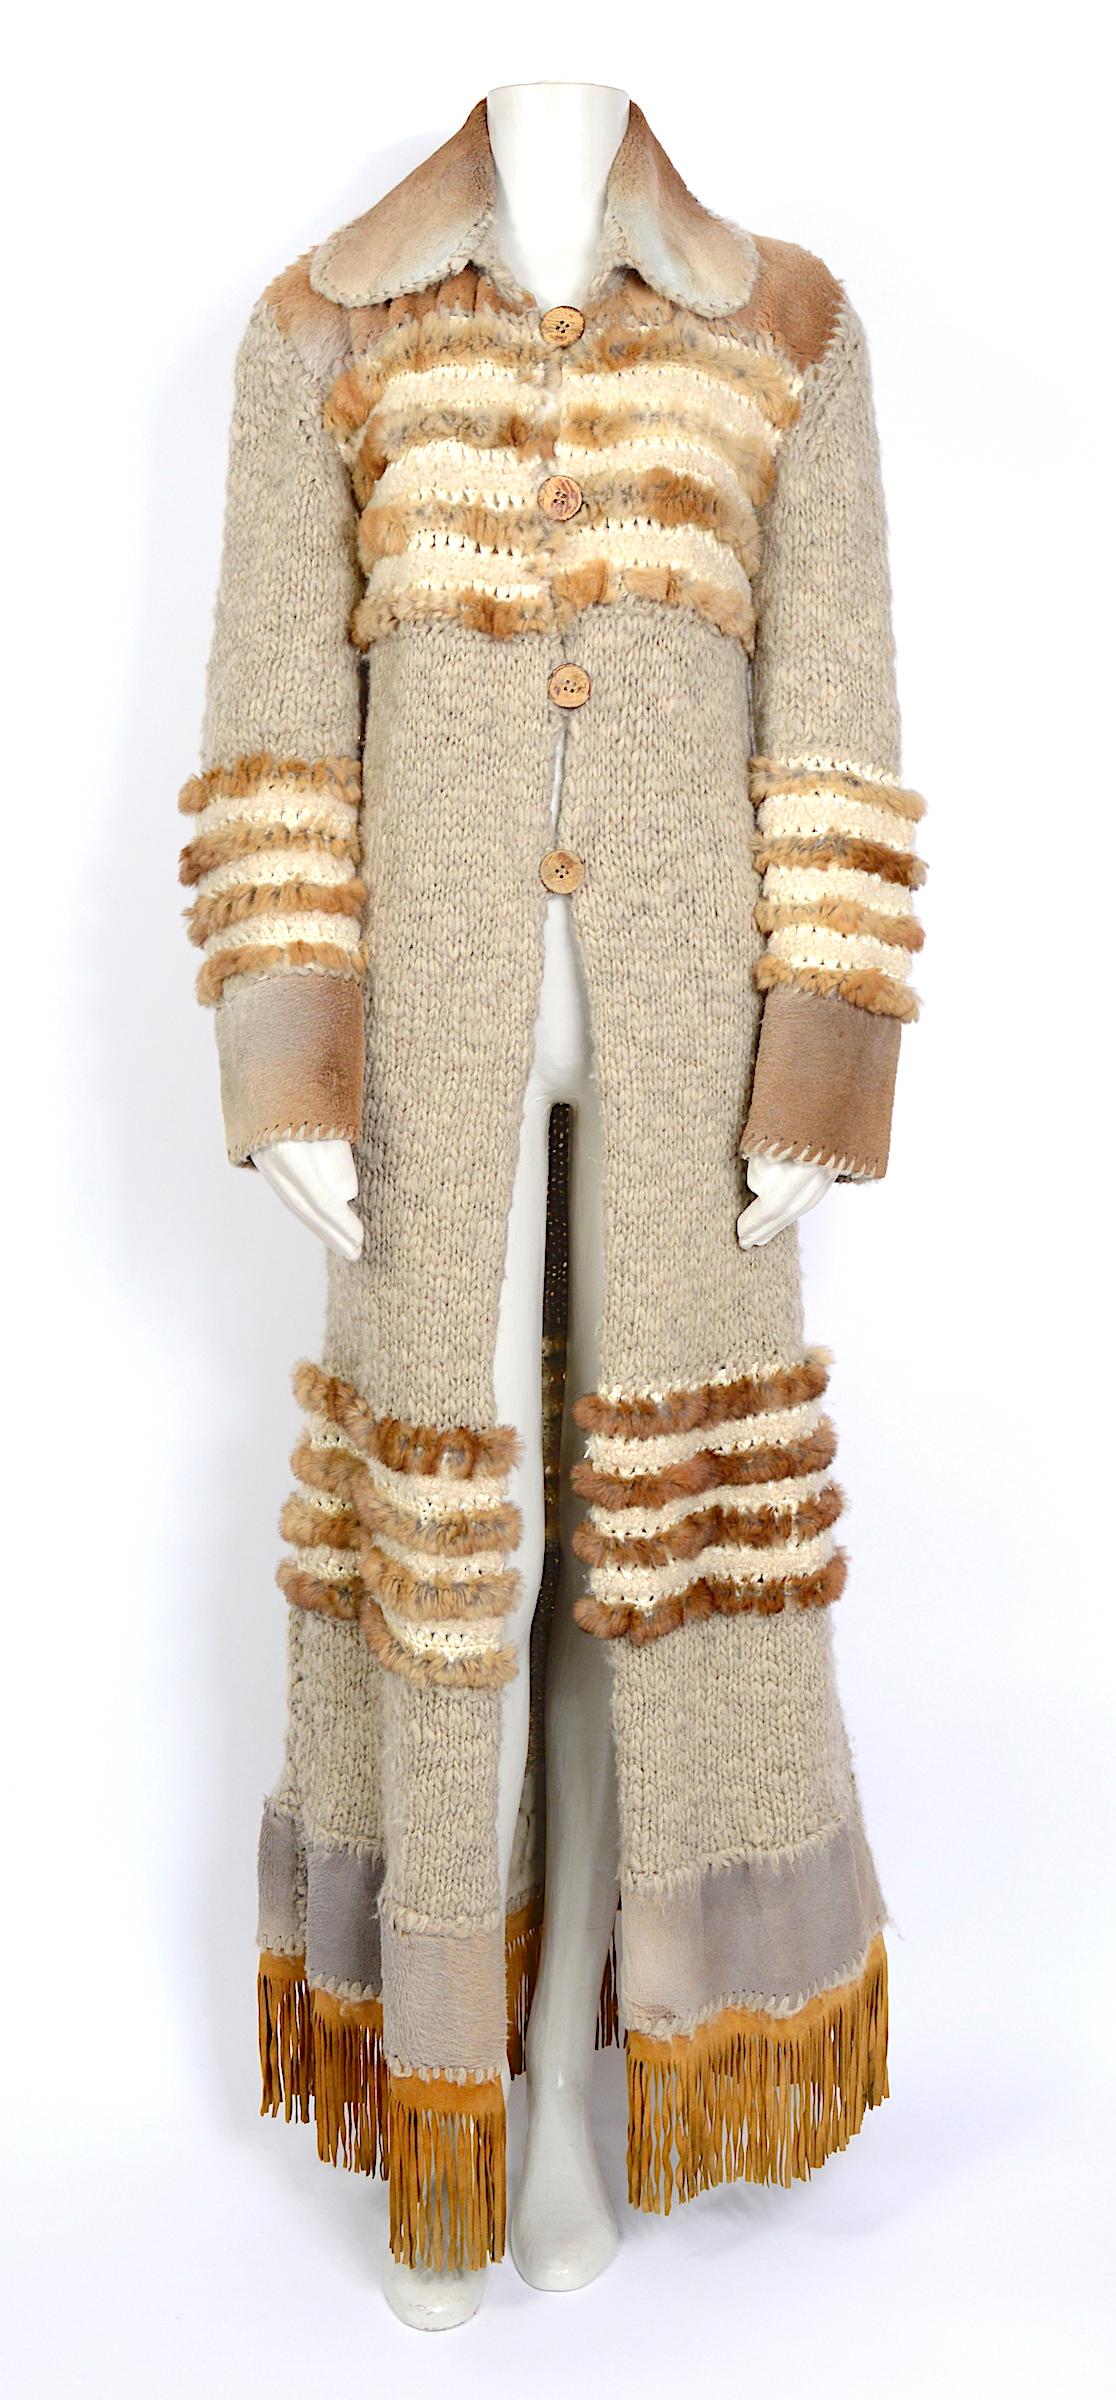 Amazing piece by John Galliano for Christian Dior fall 2000
Made in a knitted and crocheted YAK cashmere, rabbit shearling, and Kangaroo fur.
This is a showroom model used for press only and has been stored since.
In beautiful